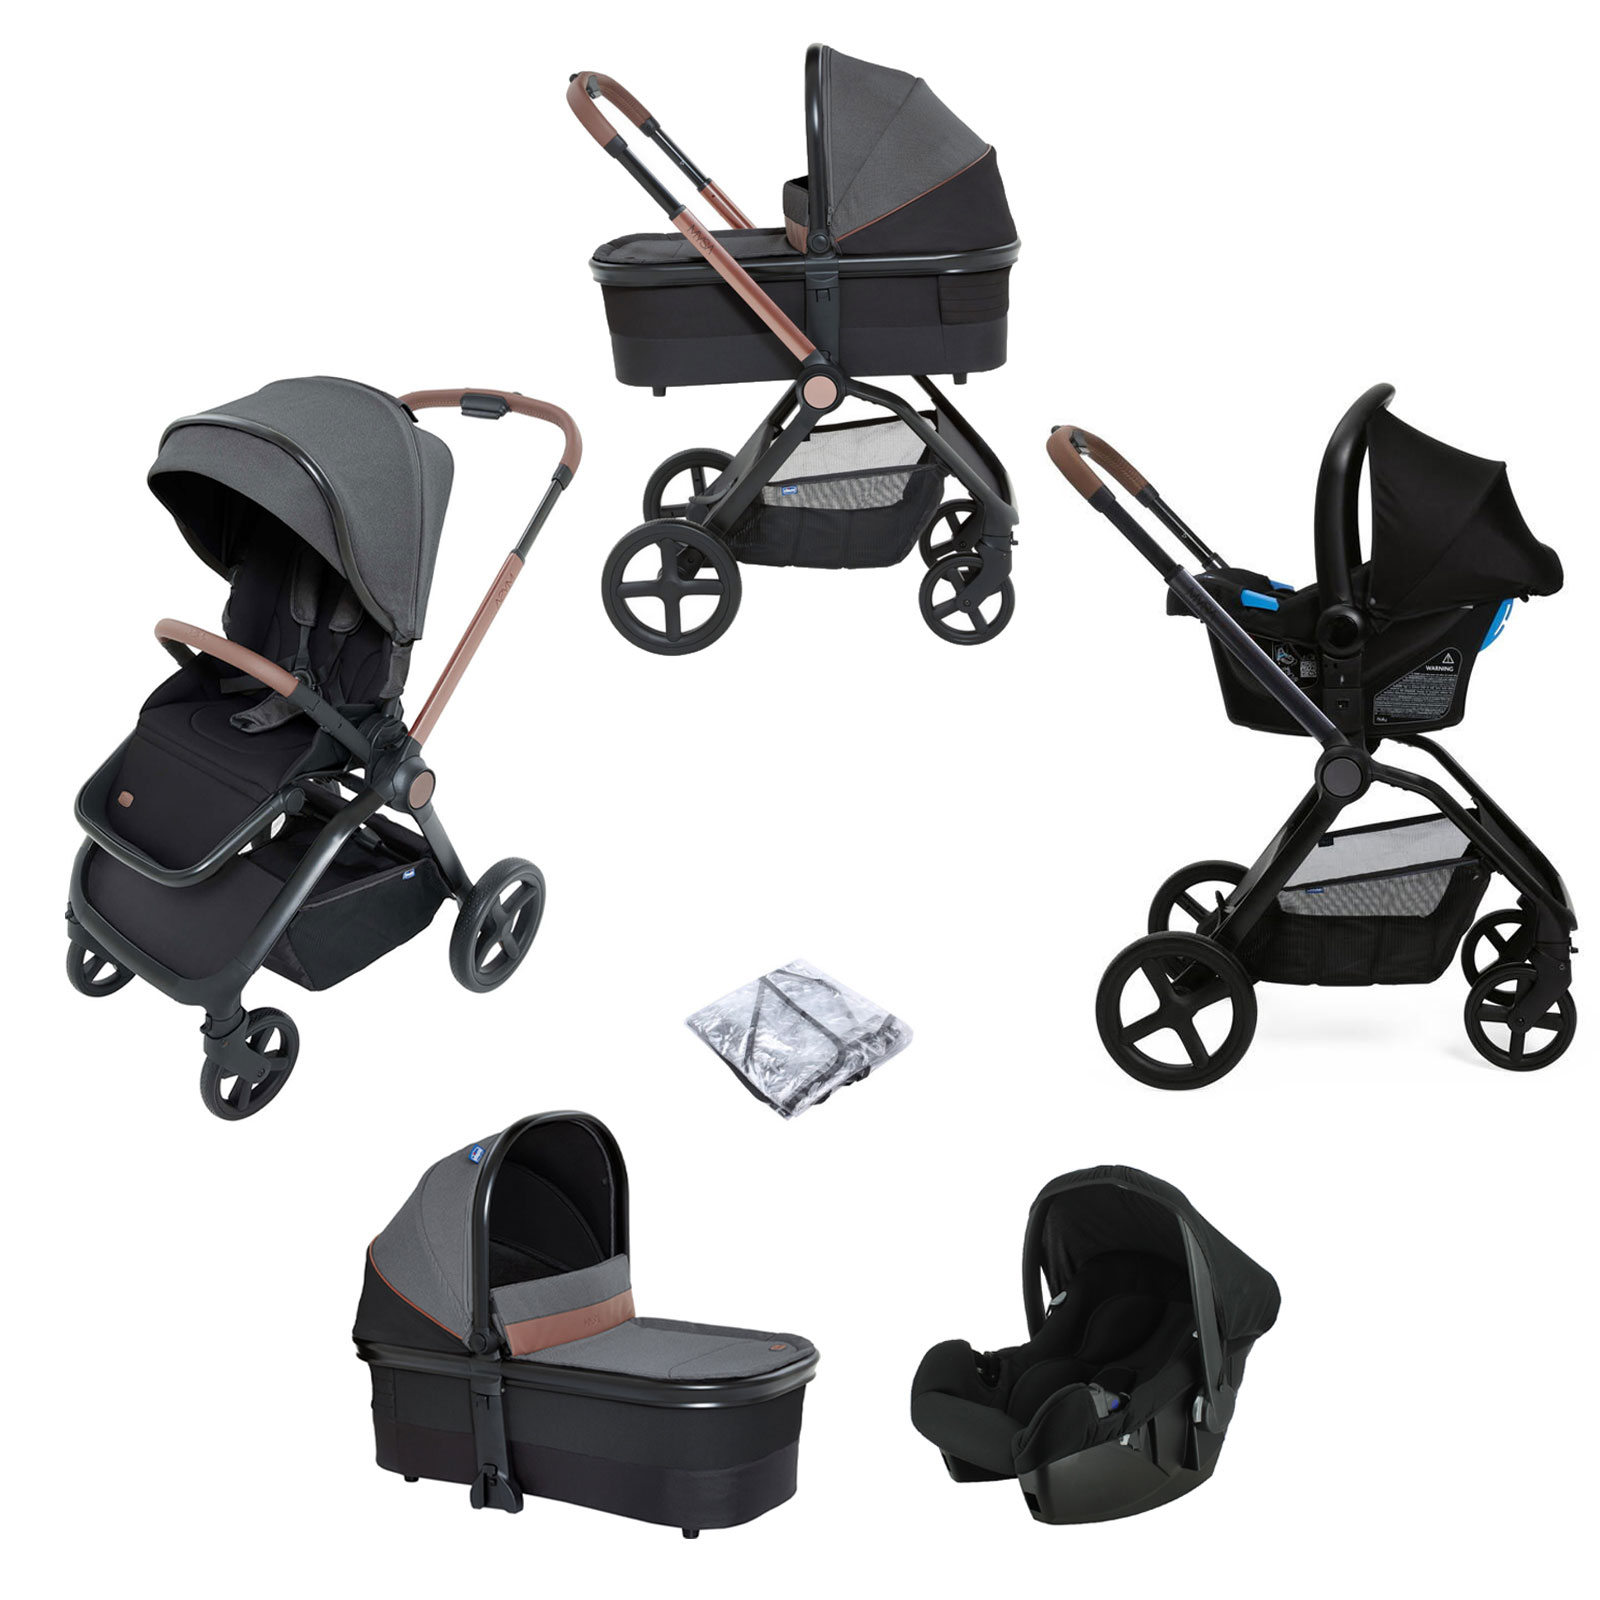 Chicco Mysa Stroller Travel System with Beone Car Seat, Carrycot & Raincover - Black Satin 